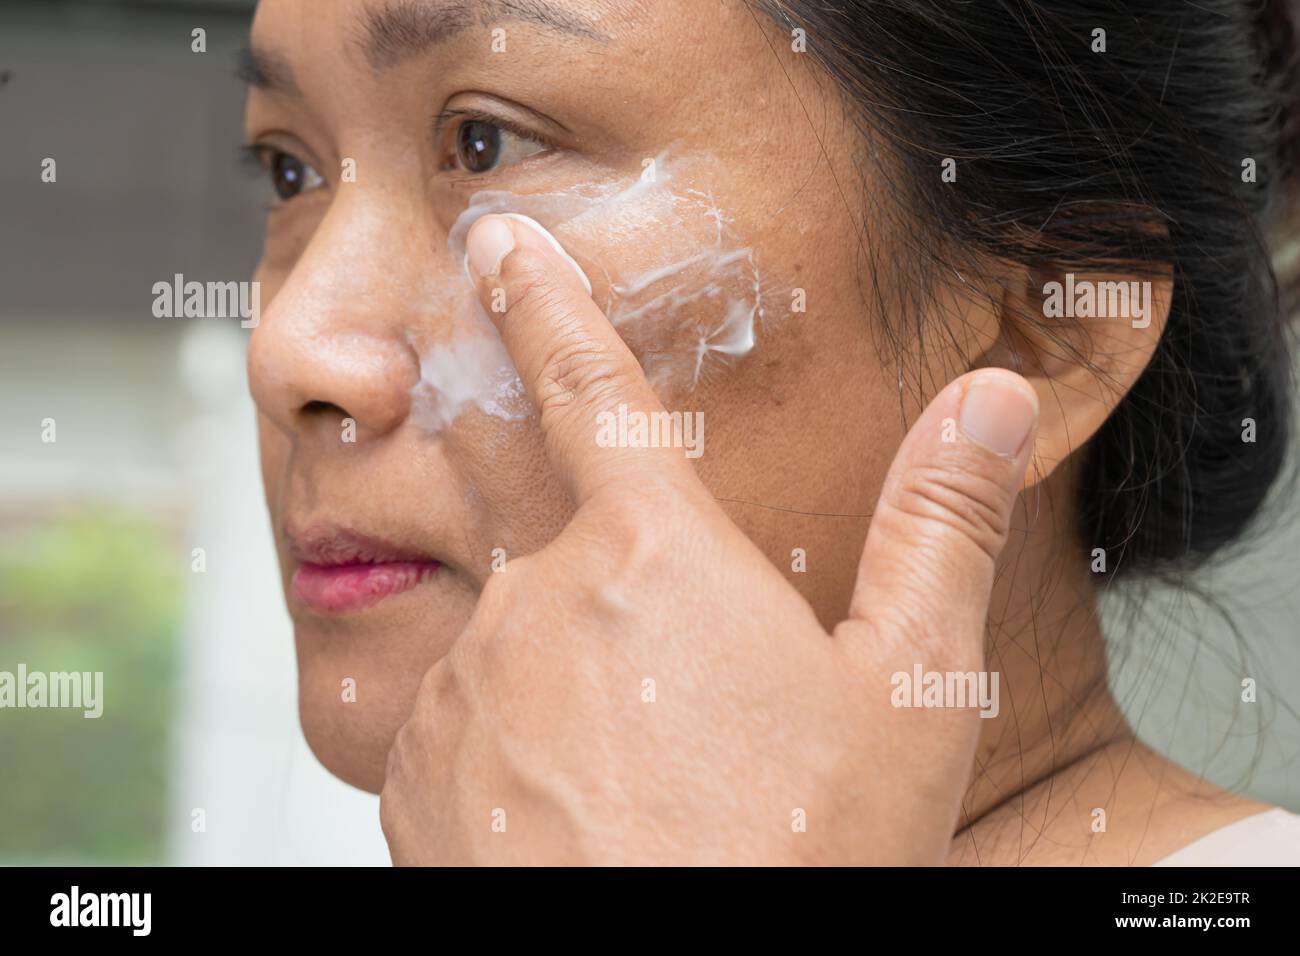 Asian lady woman applying cream skincare treatment to solve blemishes or melasma and dark spots in her face. Stock Photo